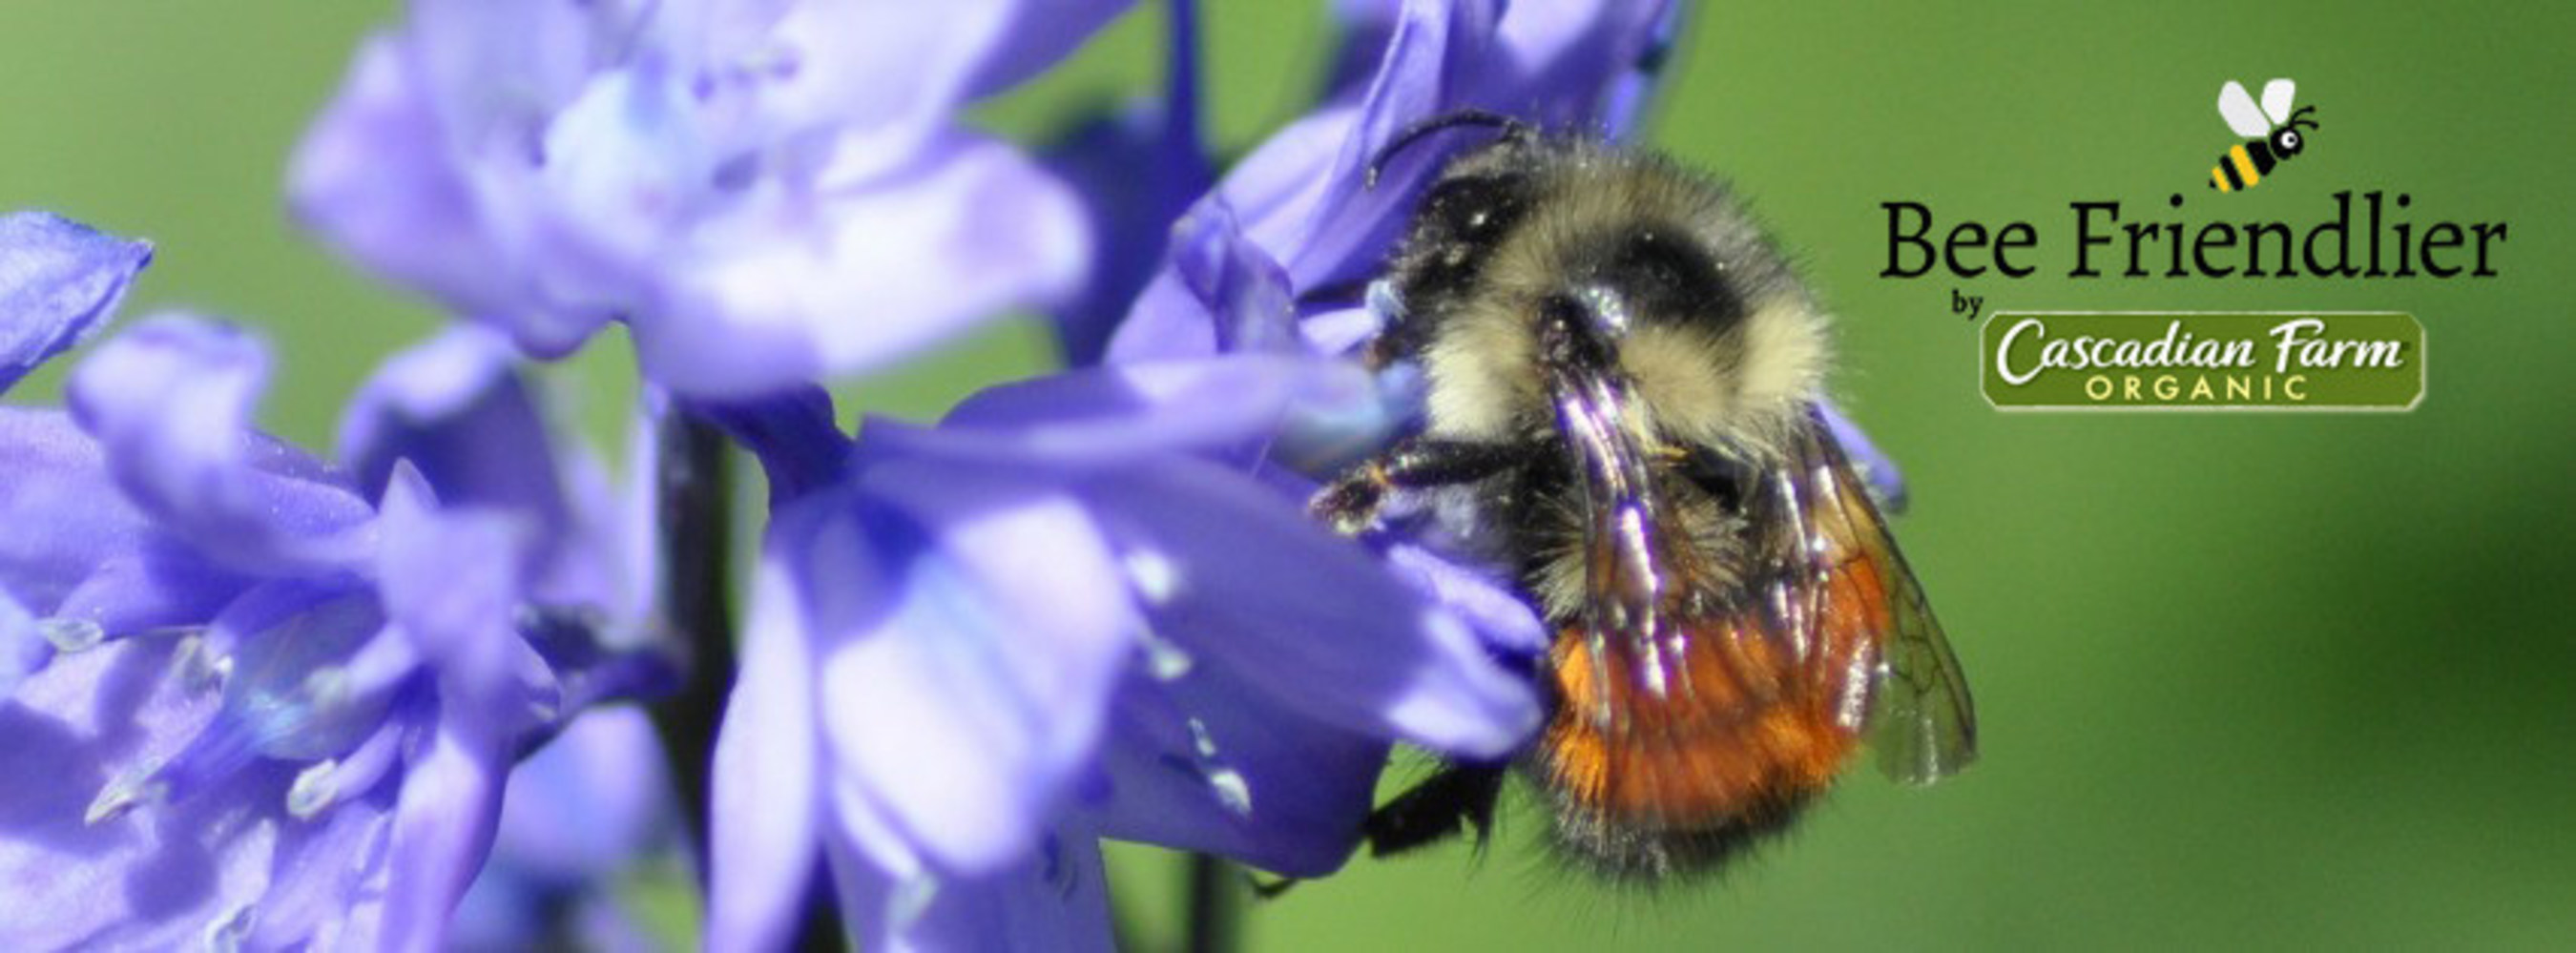 Cascadian Farm, a certified organic food brand, has committed to funding 100,000 acres of pollinator habitat planting on its supplier farms by 2020.